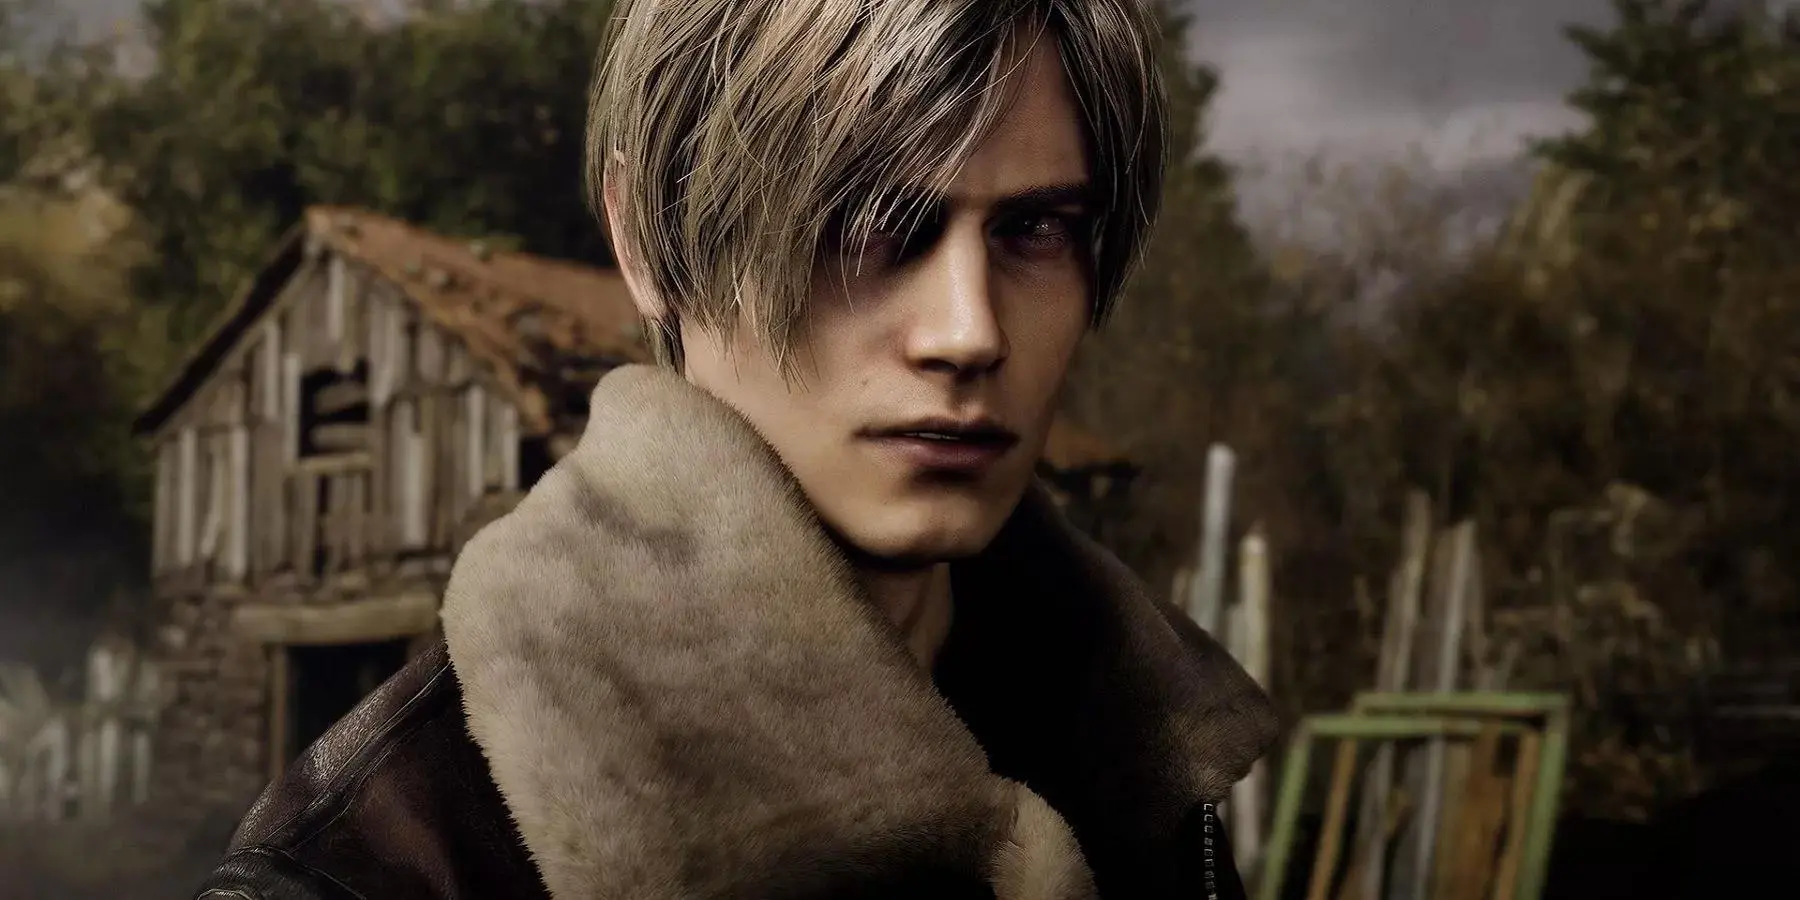 The Resident Evil 4 remake PC requirements are revealed